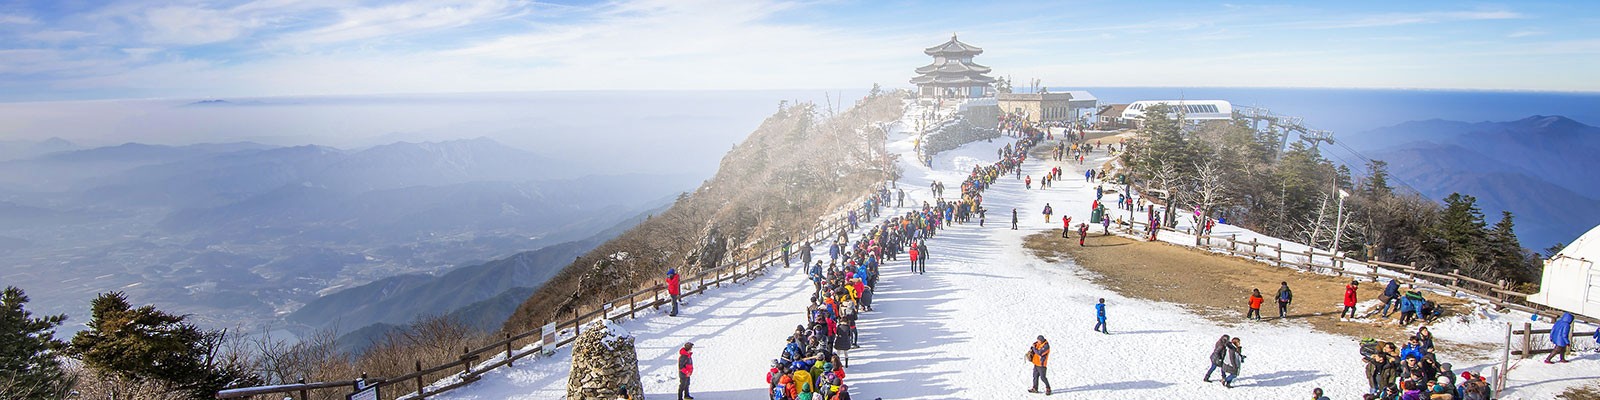 SHIMLA Tour Packages